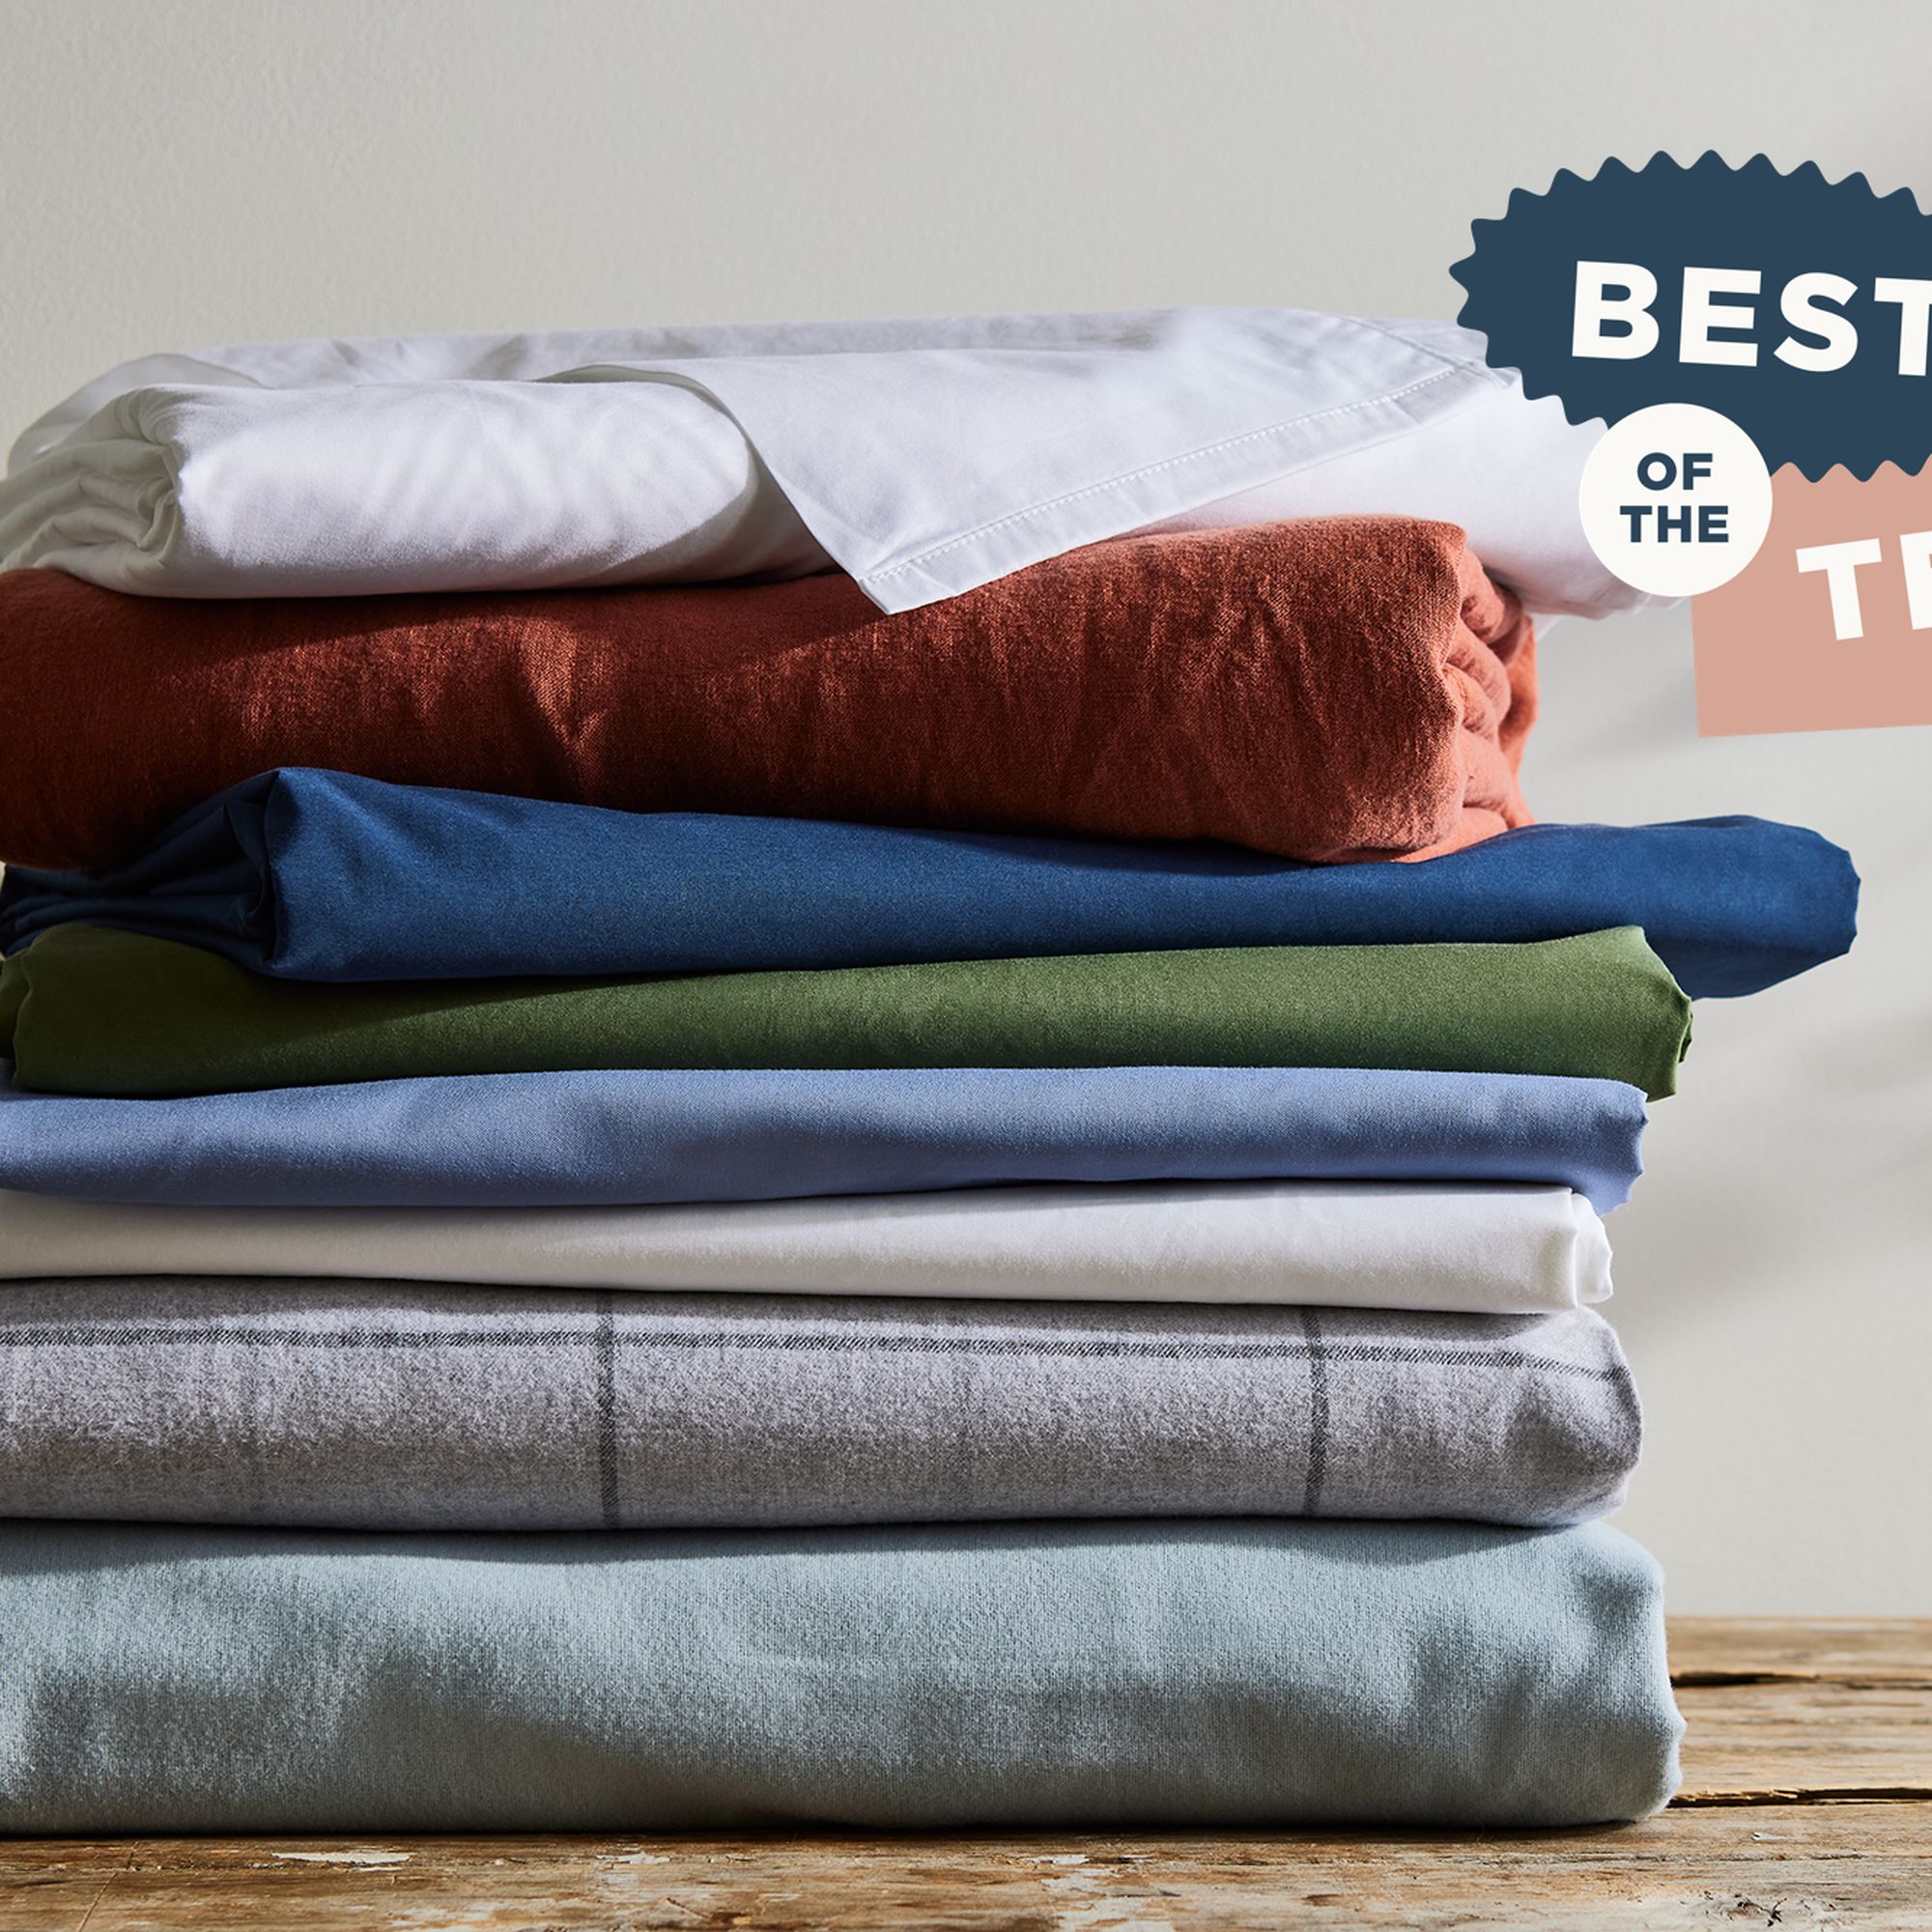 9 Best Bed Sheets 2022 - Best Sheets For Hot & Cold Sleepers